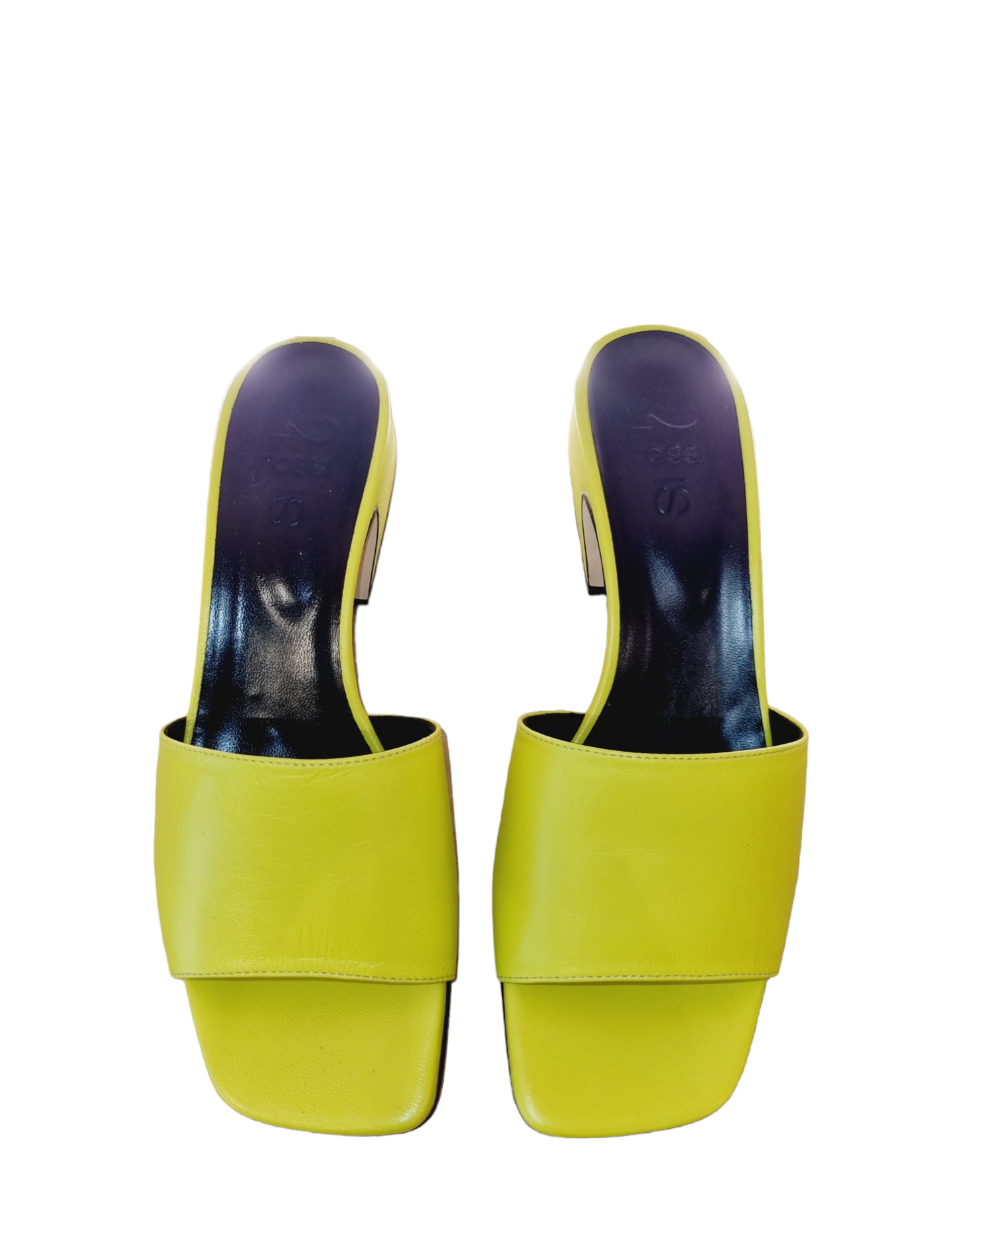 Si Rossi Lime Green Slip-On Slides - SERGIO ROSSI - Liberty Shoes Australia